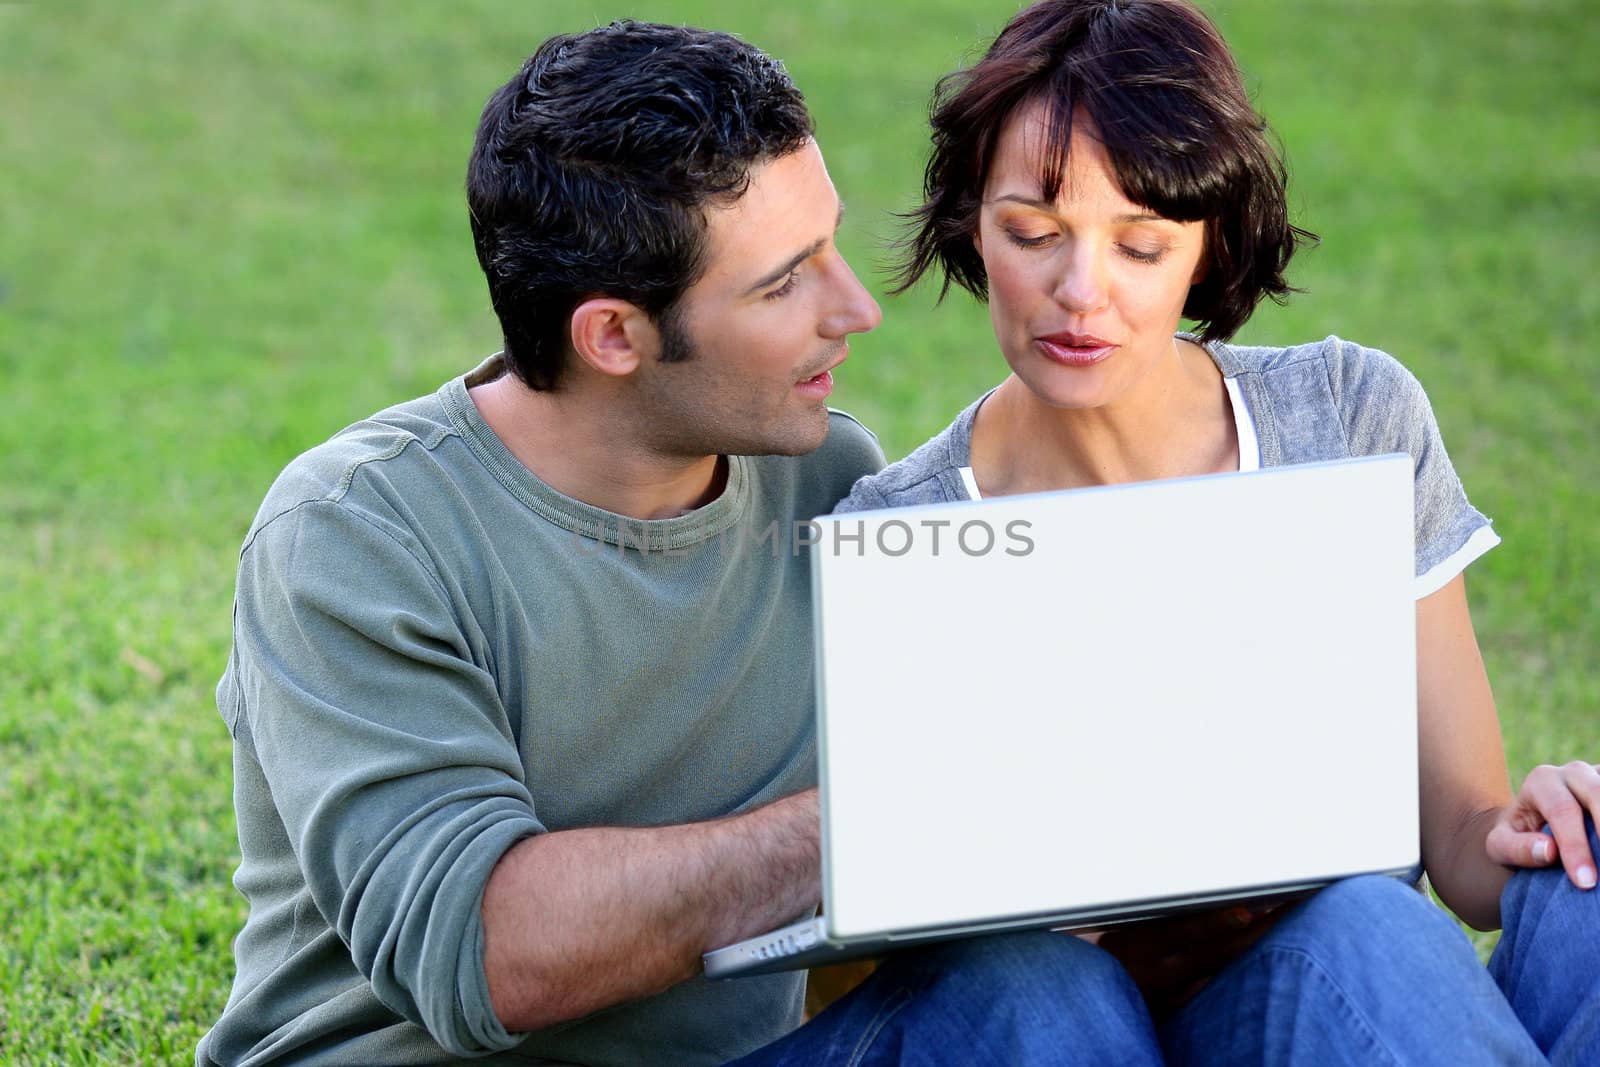 Couple making use of free wifi in the park